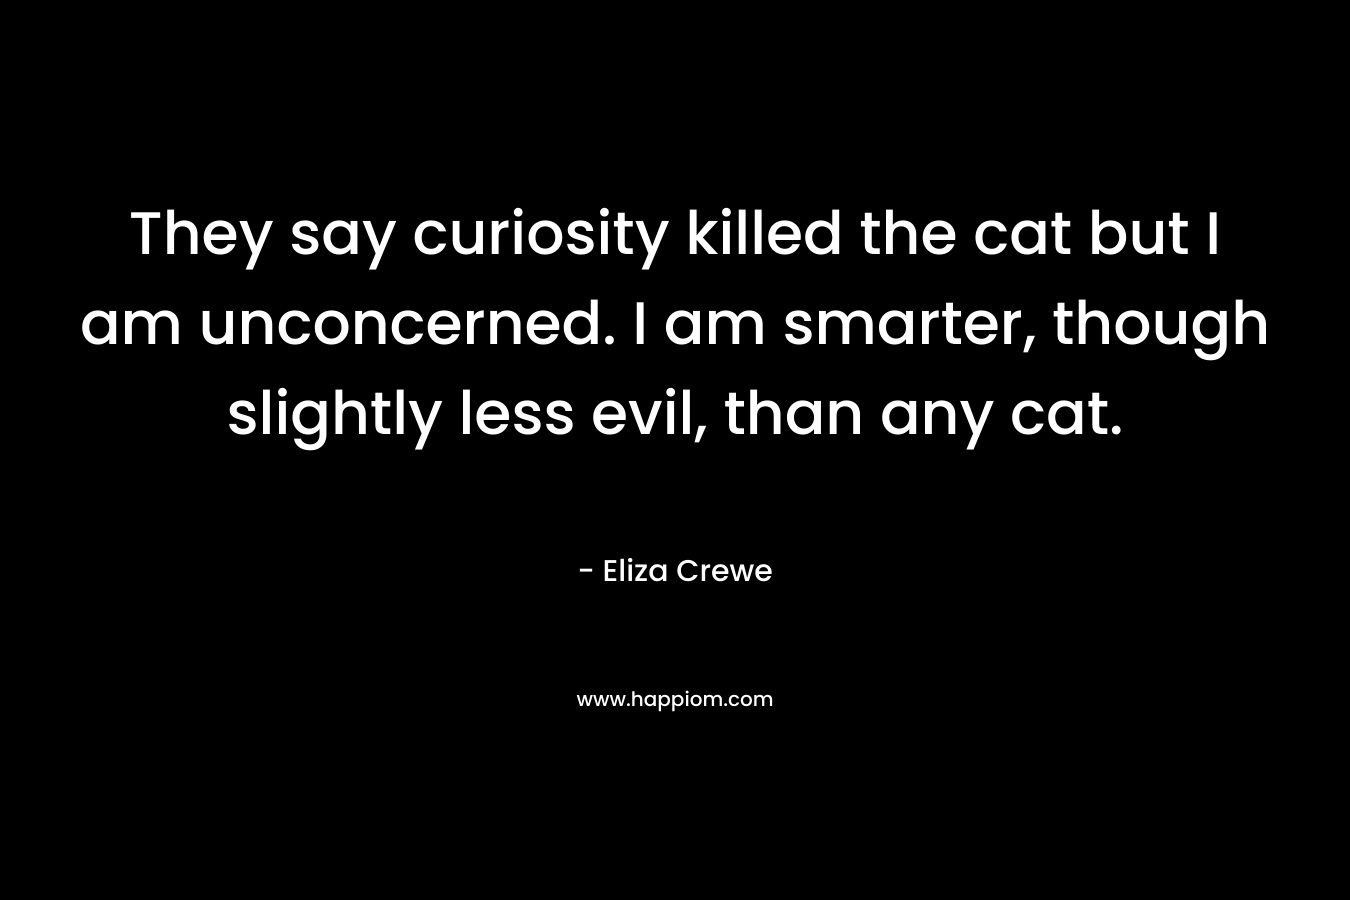 They say curiosity killed the cat but I am unconcerned. I am smarter, though slightly less evil, than any cat. – Eliza Crewe